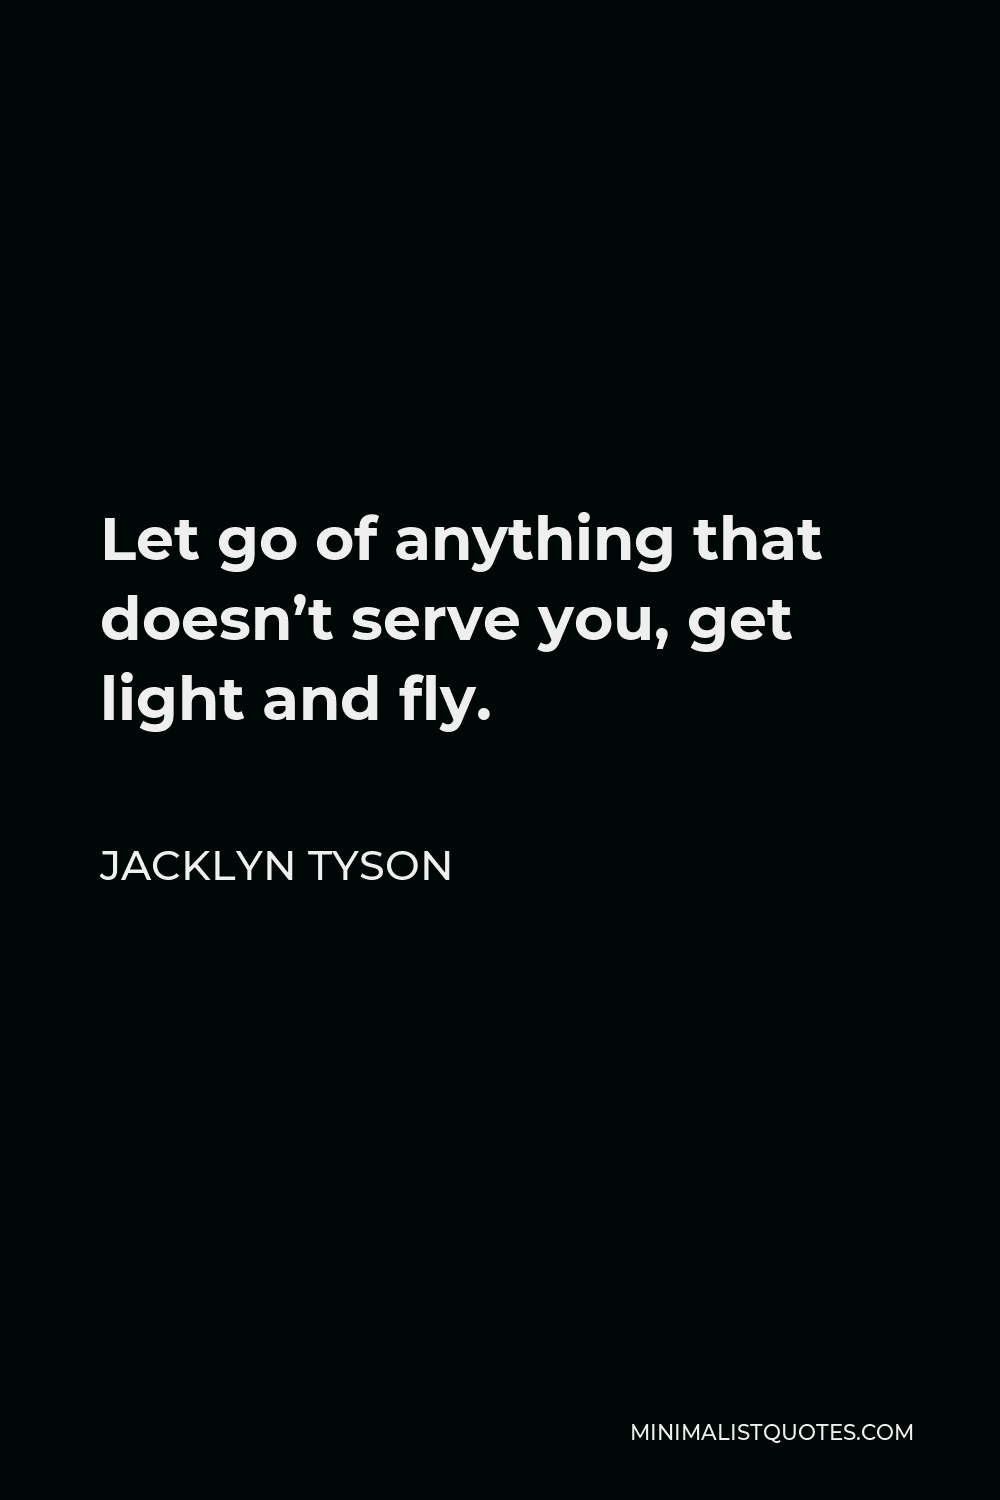 Jacklyn Tyson Quote - Let go of anything that doesn’t serve you, get light and fly.